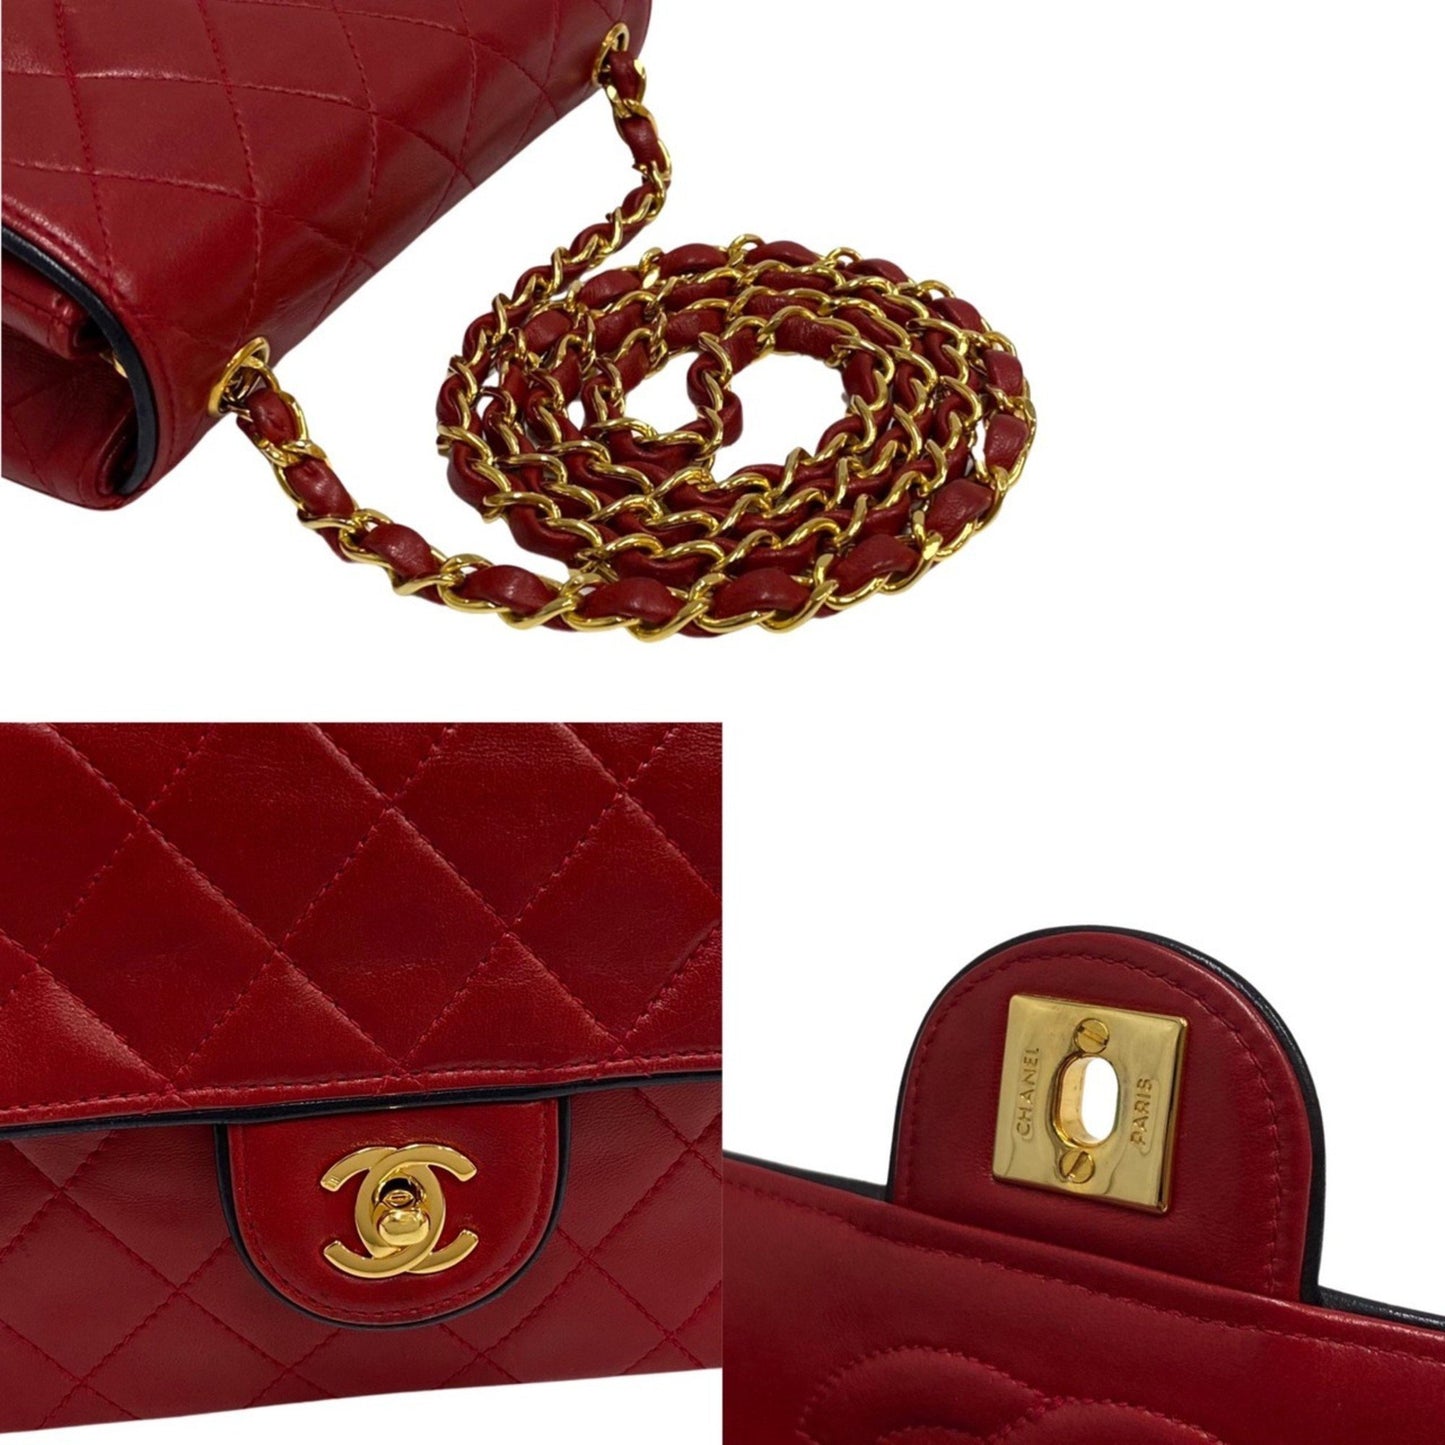 Chanel Women's Red Leather Shoulder Bag in Red